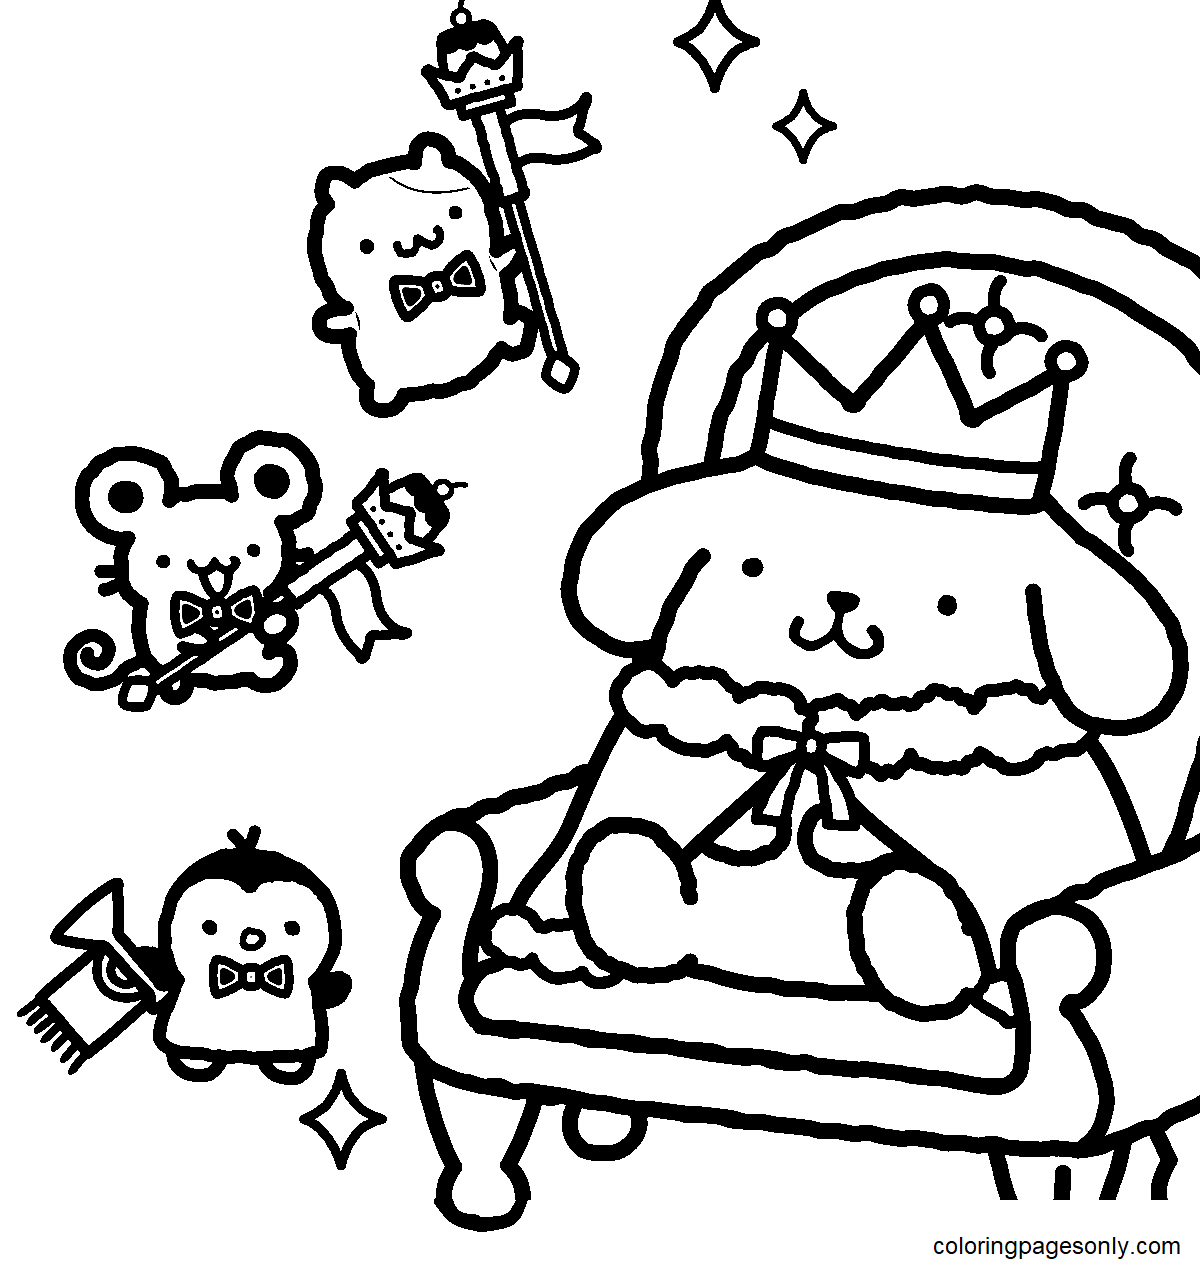 King Pompompurin with Muffin, Scone and Whip from Pompompurin